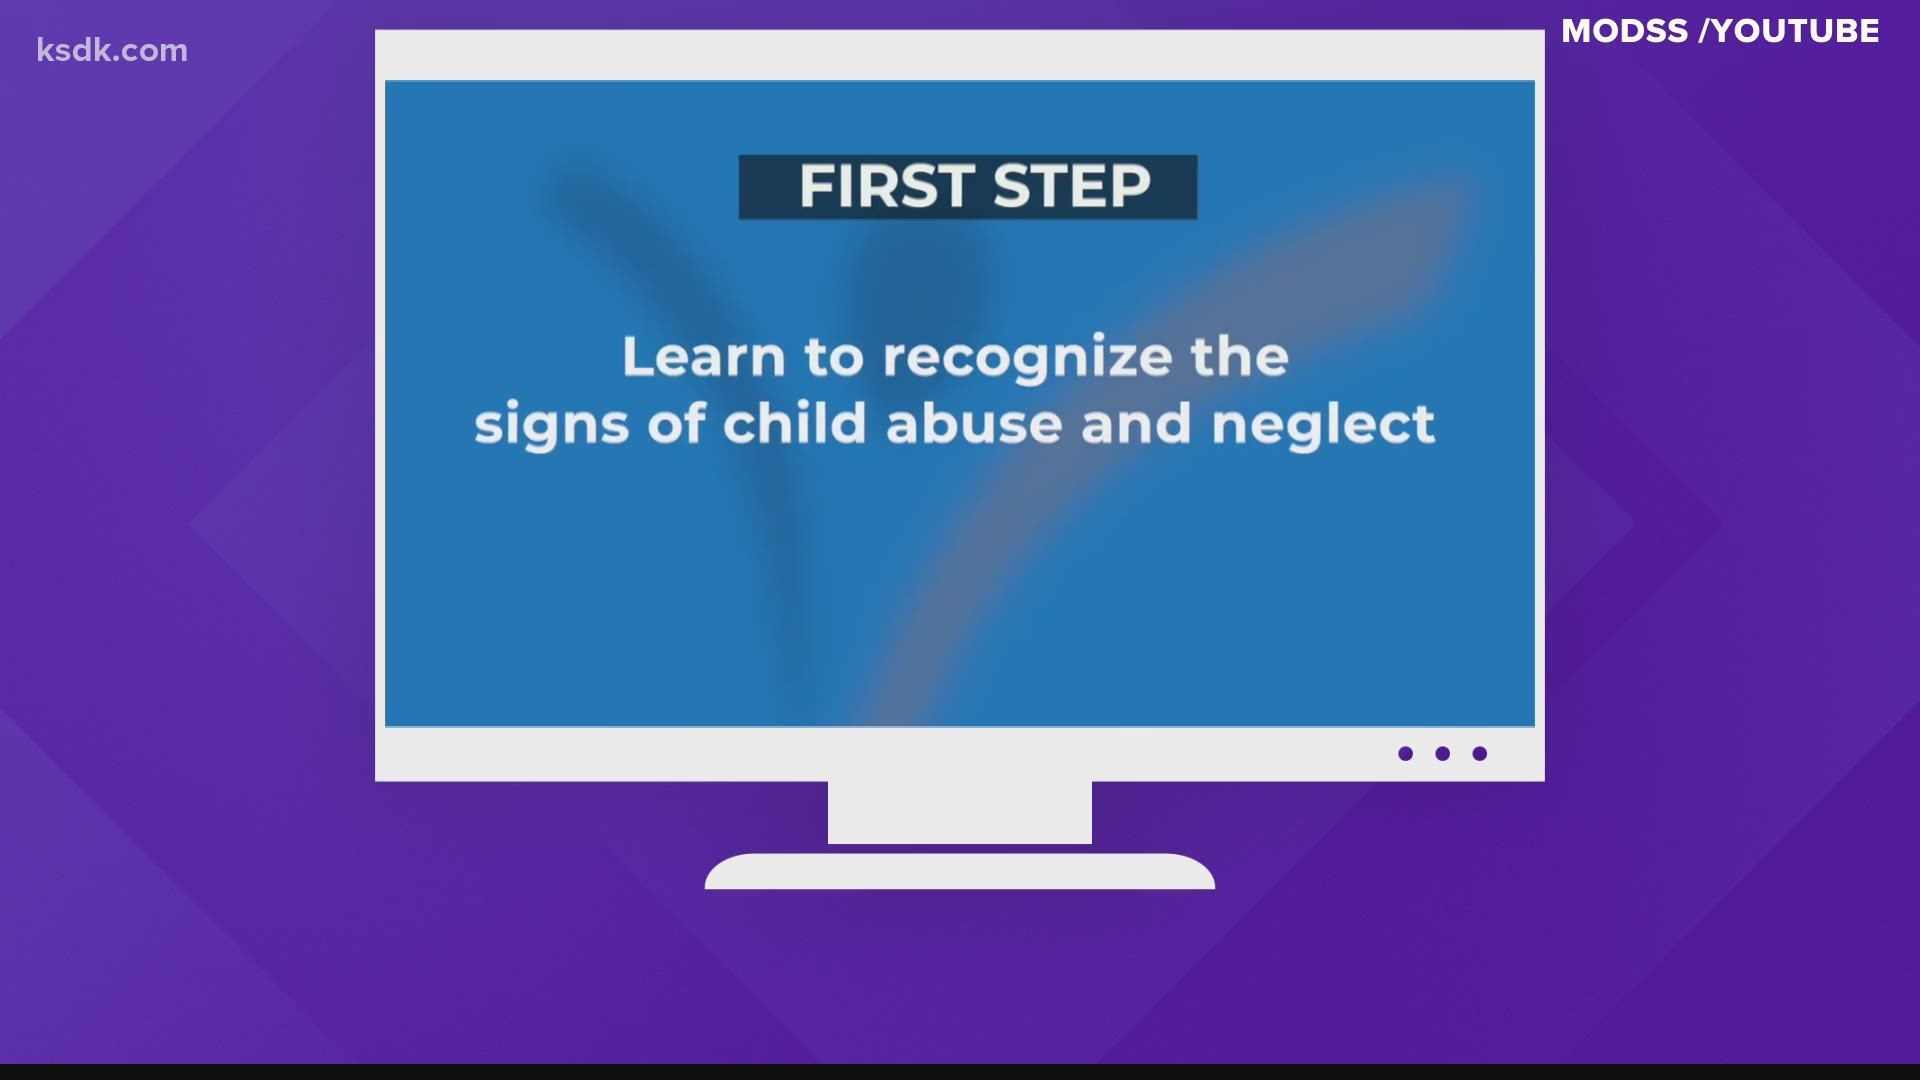 The video reminds educators of the online reporting option, tips and resources about reporting abuse